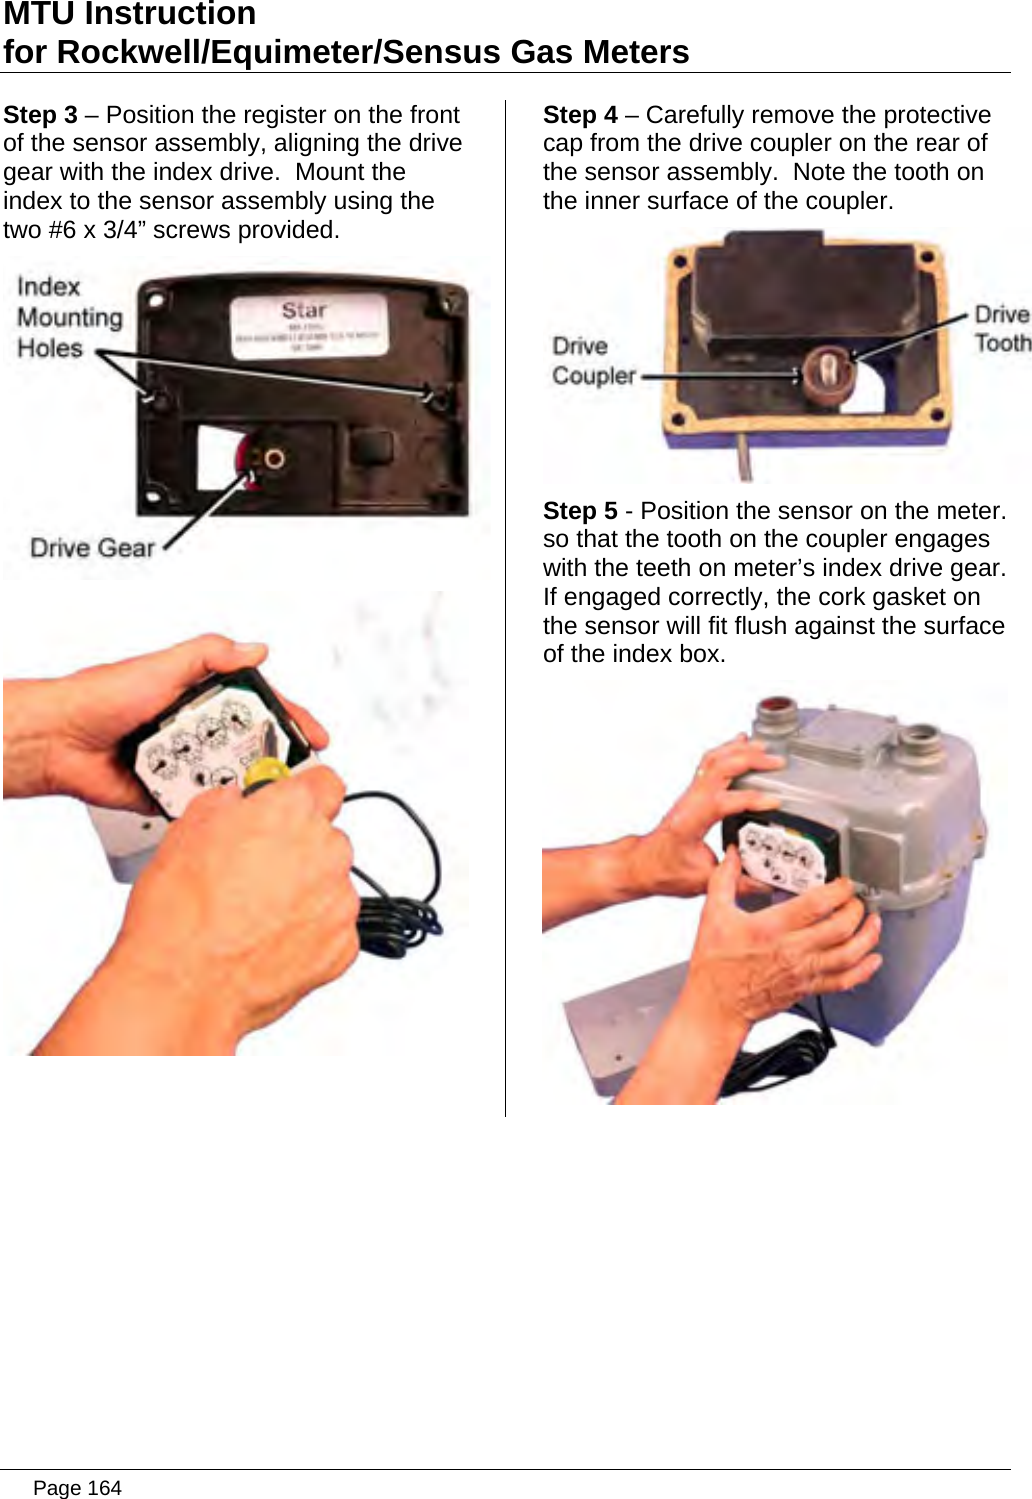 Page 164 of Aclara Technologies 09015 Transmitter for Meter Reading User Manual users manual